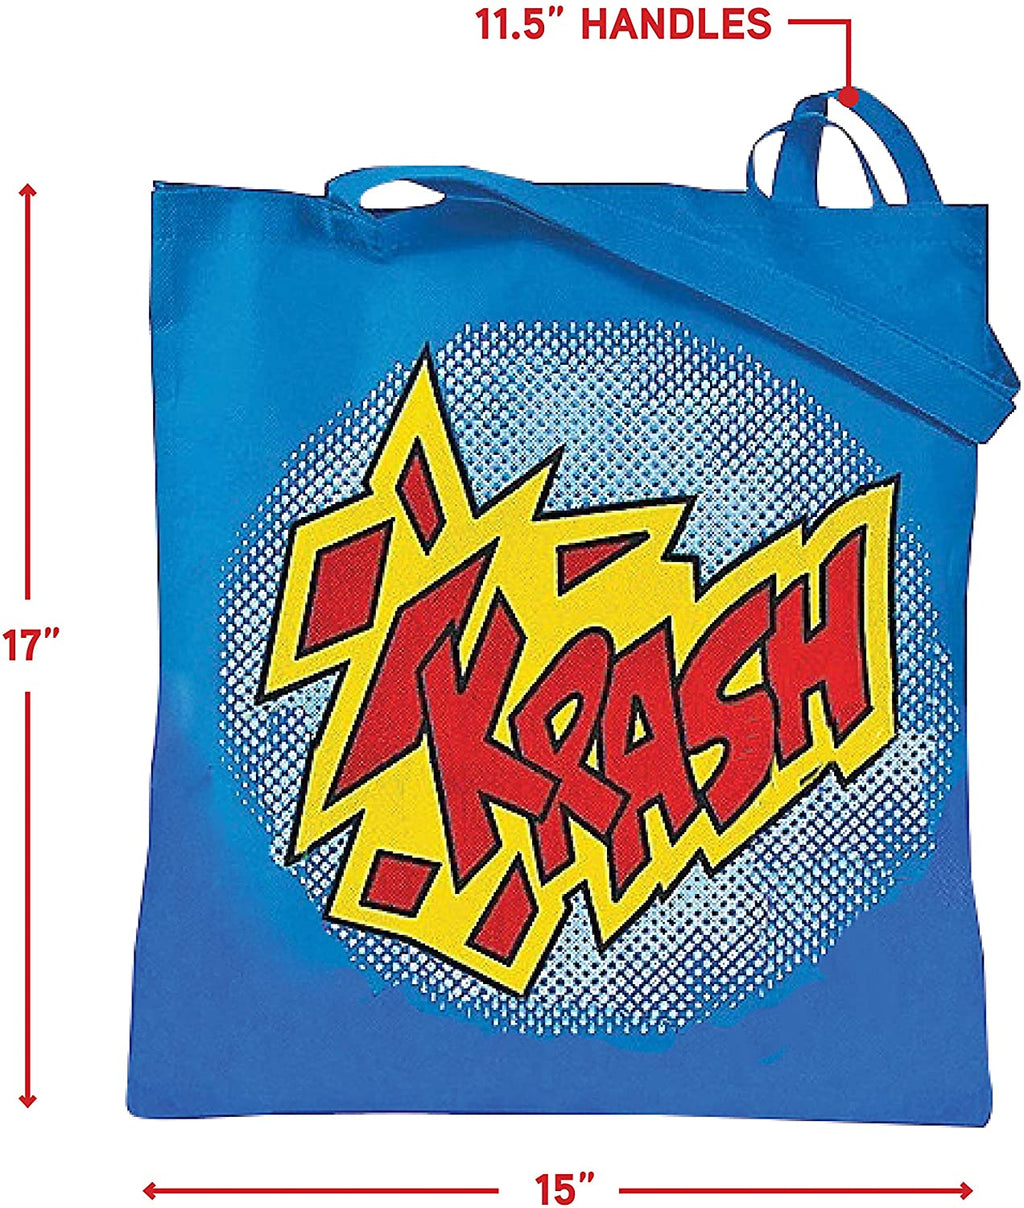 bags to carry wet swimwear in the beach company kids tote bag women birthday gift bags superhero bags set of 4 beach bags mother pool essential colourful graphic tote bags the beach company shop online India 